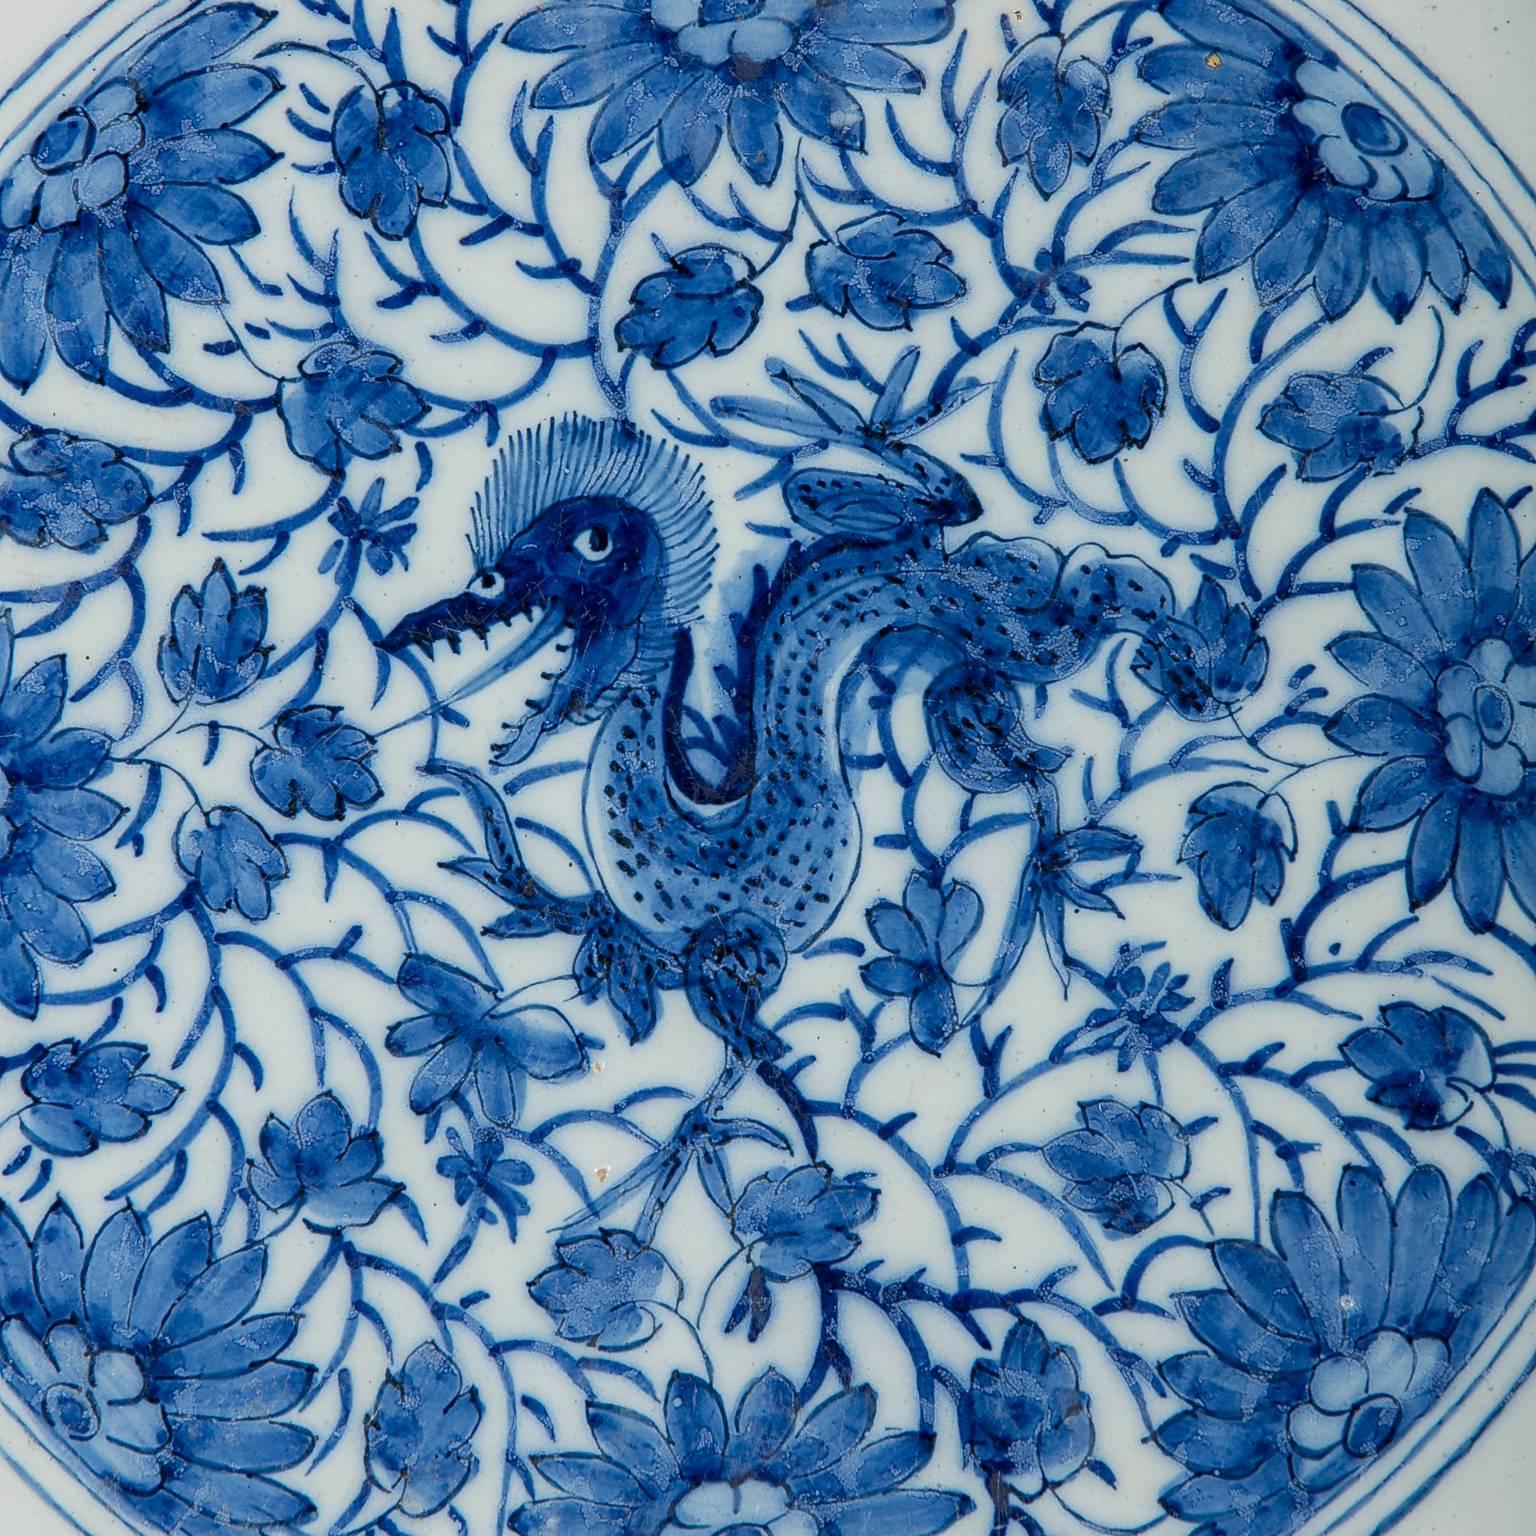 A pair of 18th century blue and white Dutch Delft chargers decorated with dragons.
The mythical dragon in the center of these chargers is a rare motif on Delft plates. It has an open mouth, sharp teeth, hair standing on end, and sharp claws. The